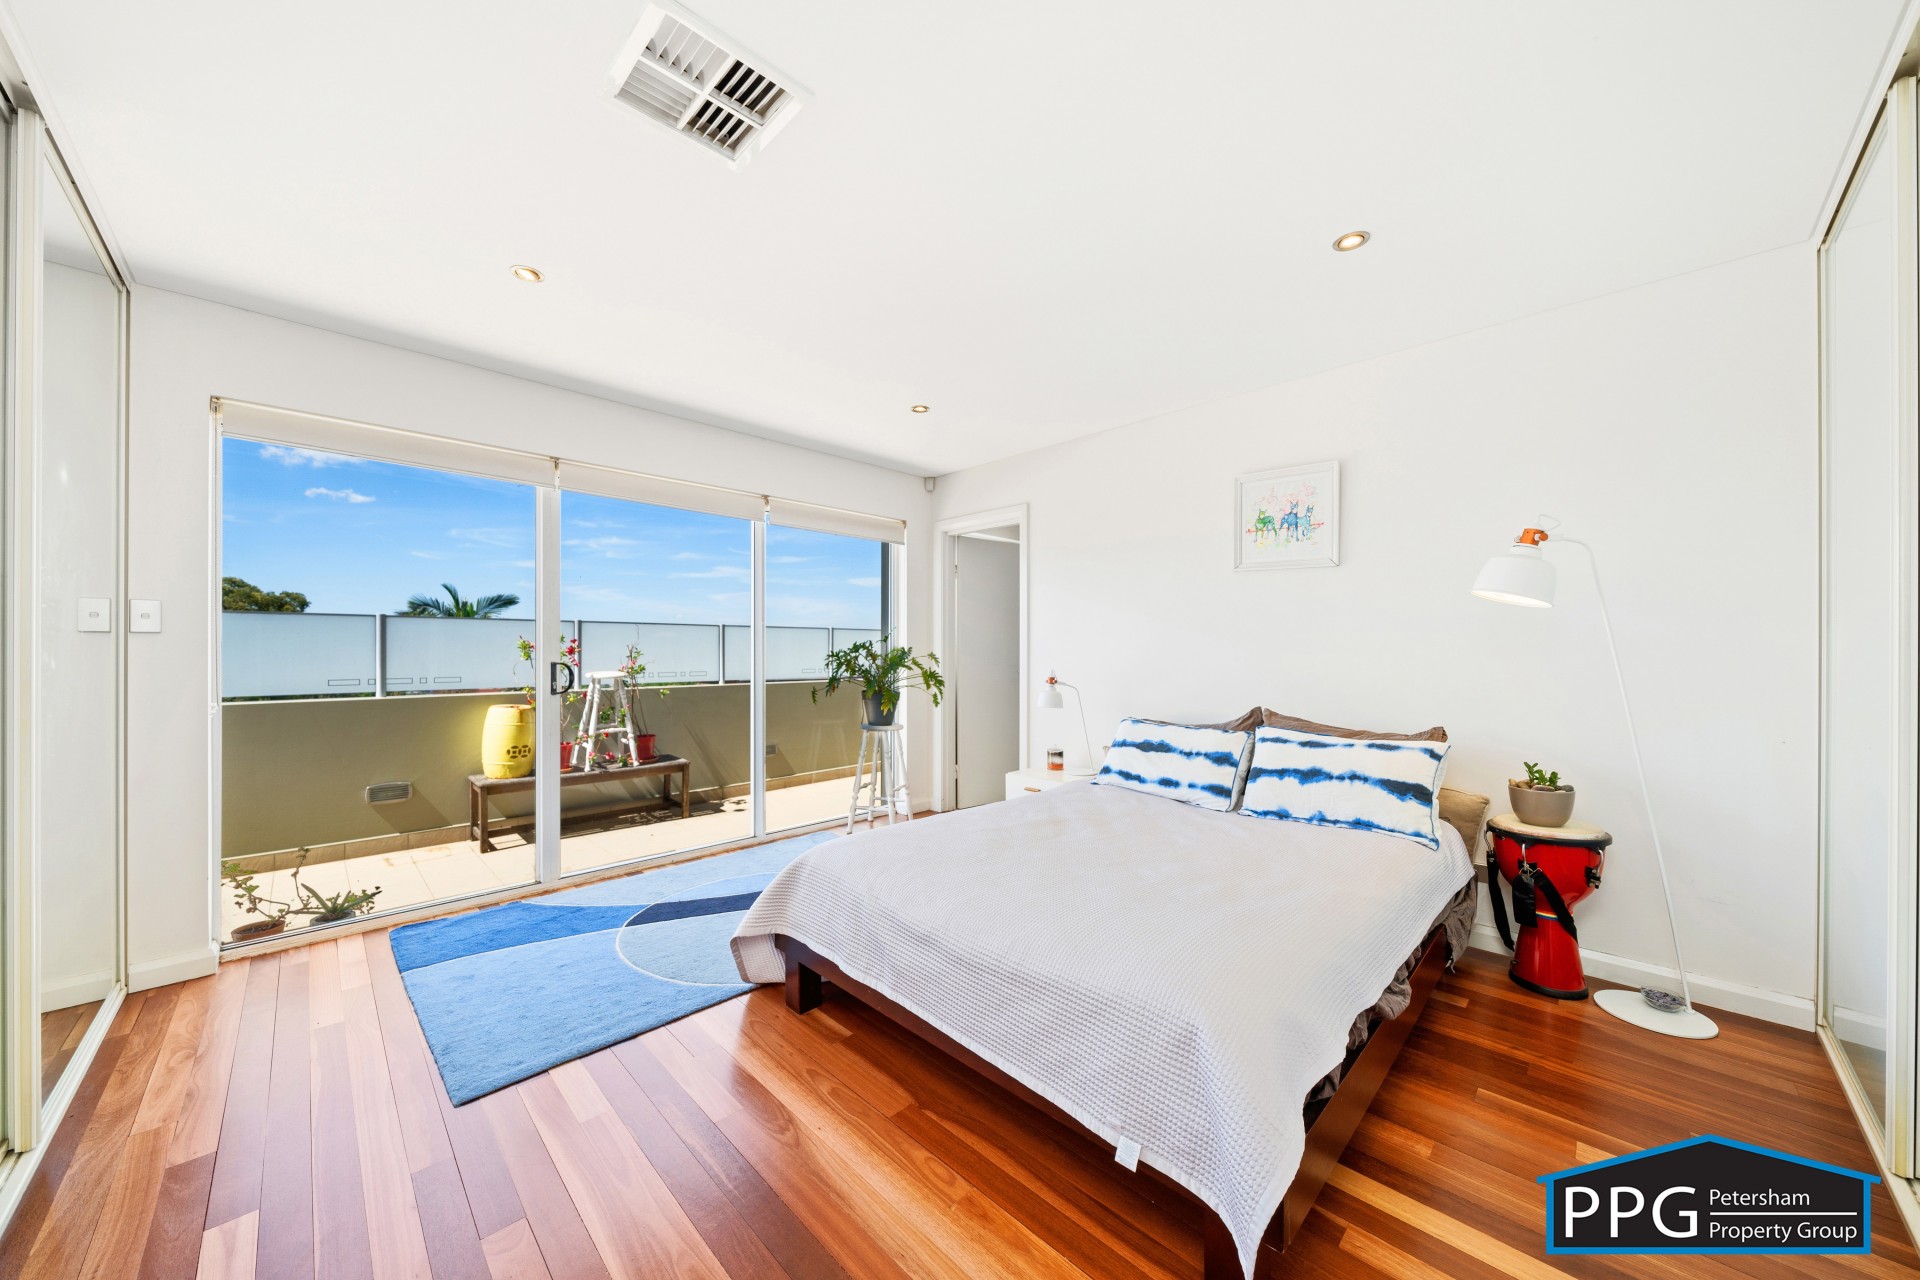 Selling your property in Petersham